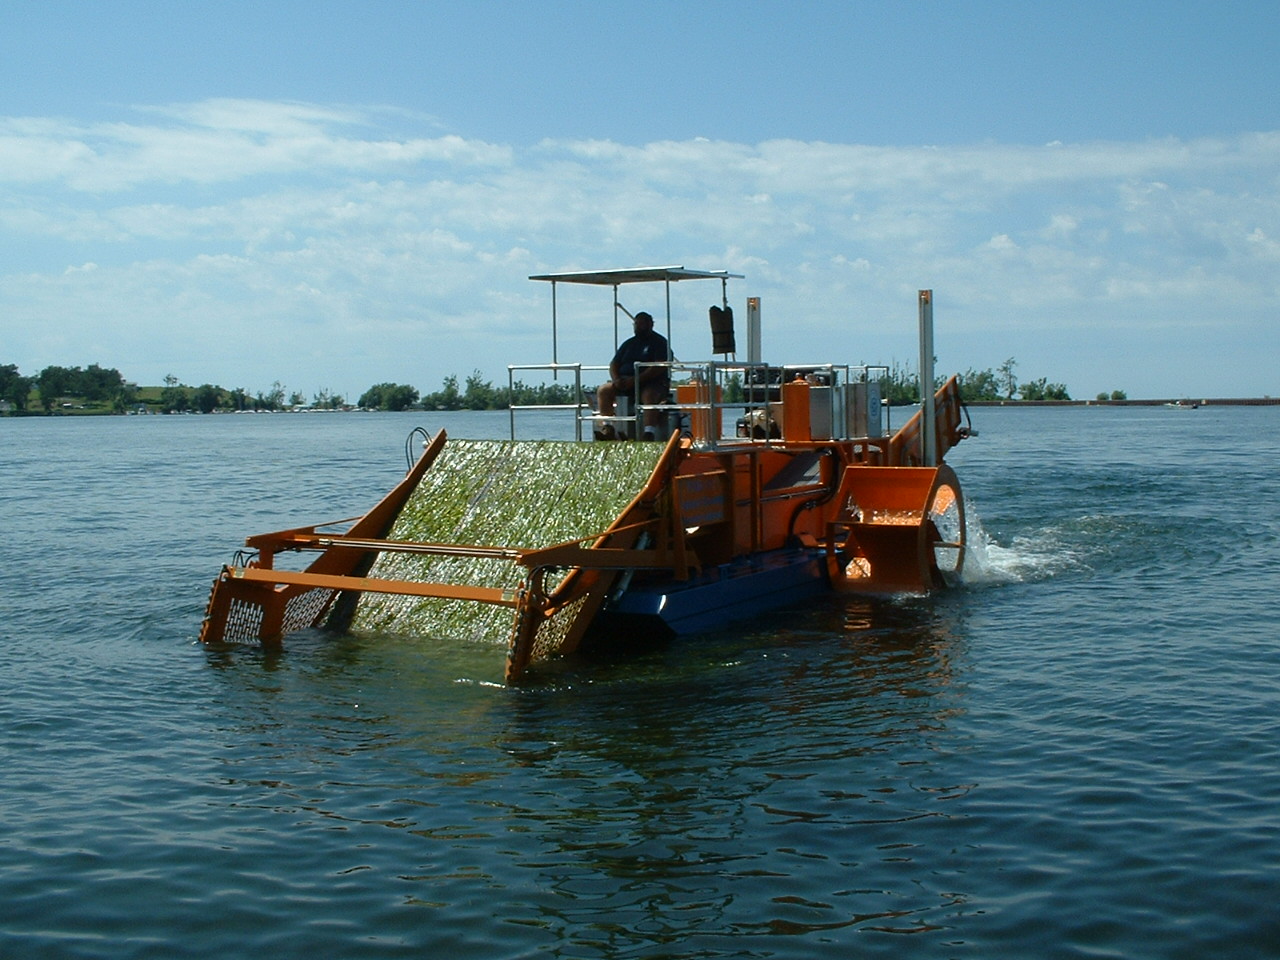 Alphaboats FX-11 Waterweed Harvester rolling weeds up its wide cutting conveyor